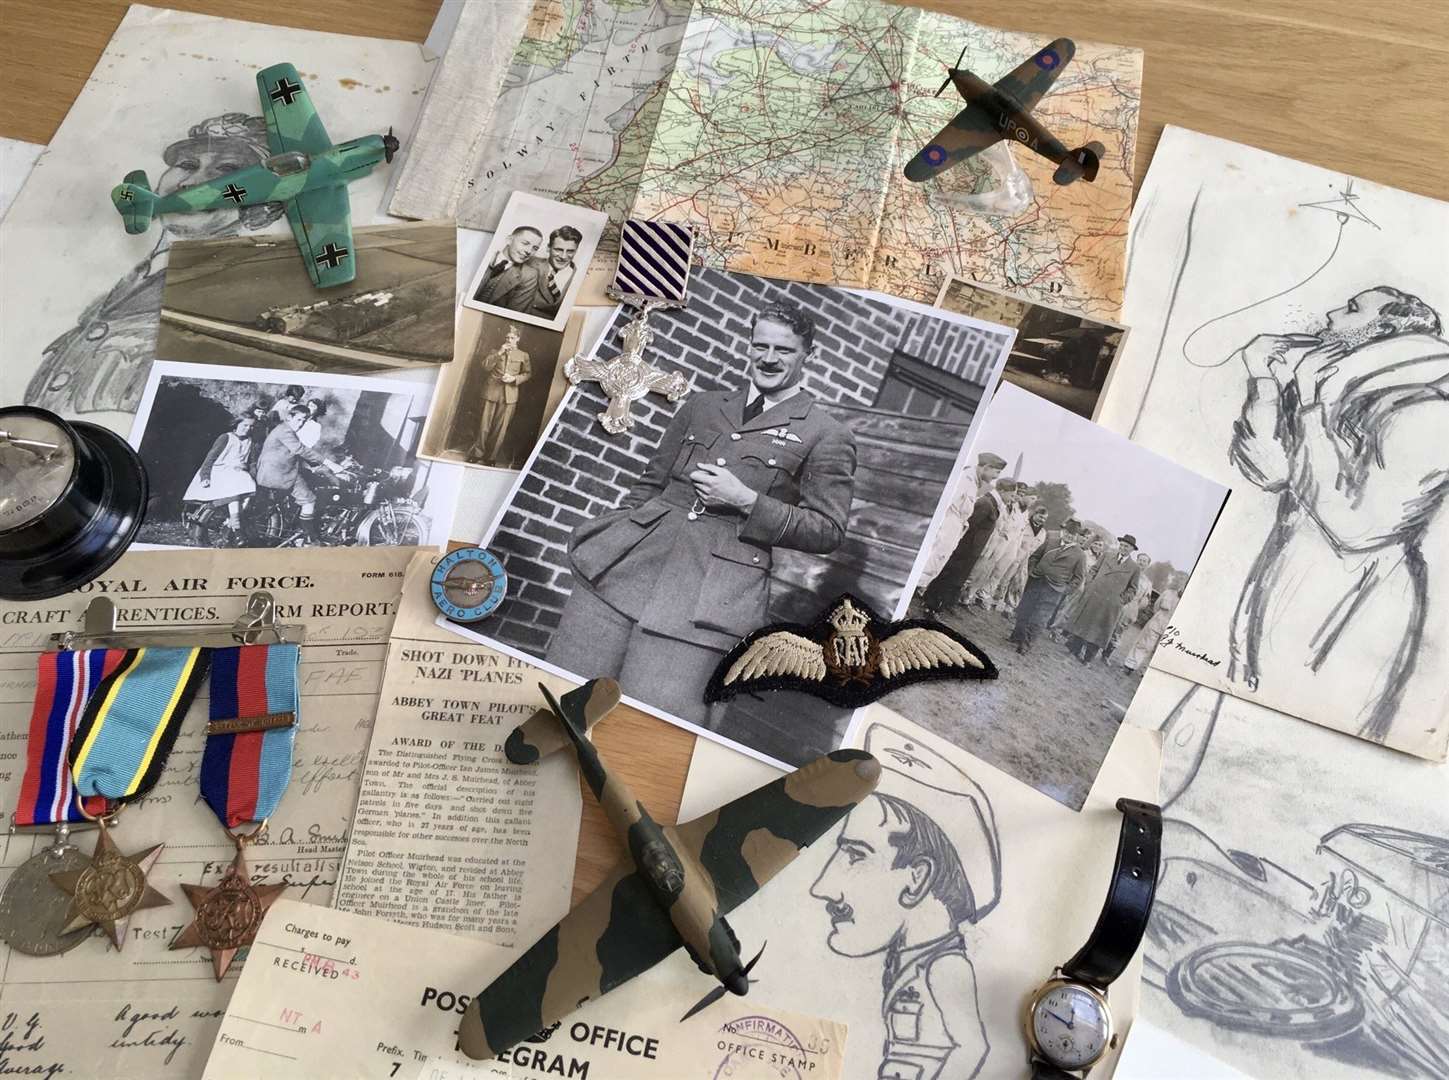 David Carruthers, 61, collection of memorabilia of his uncle